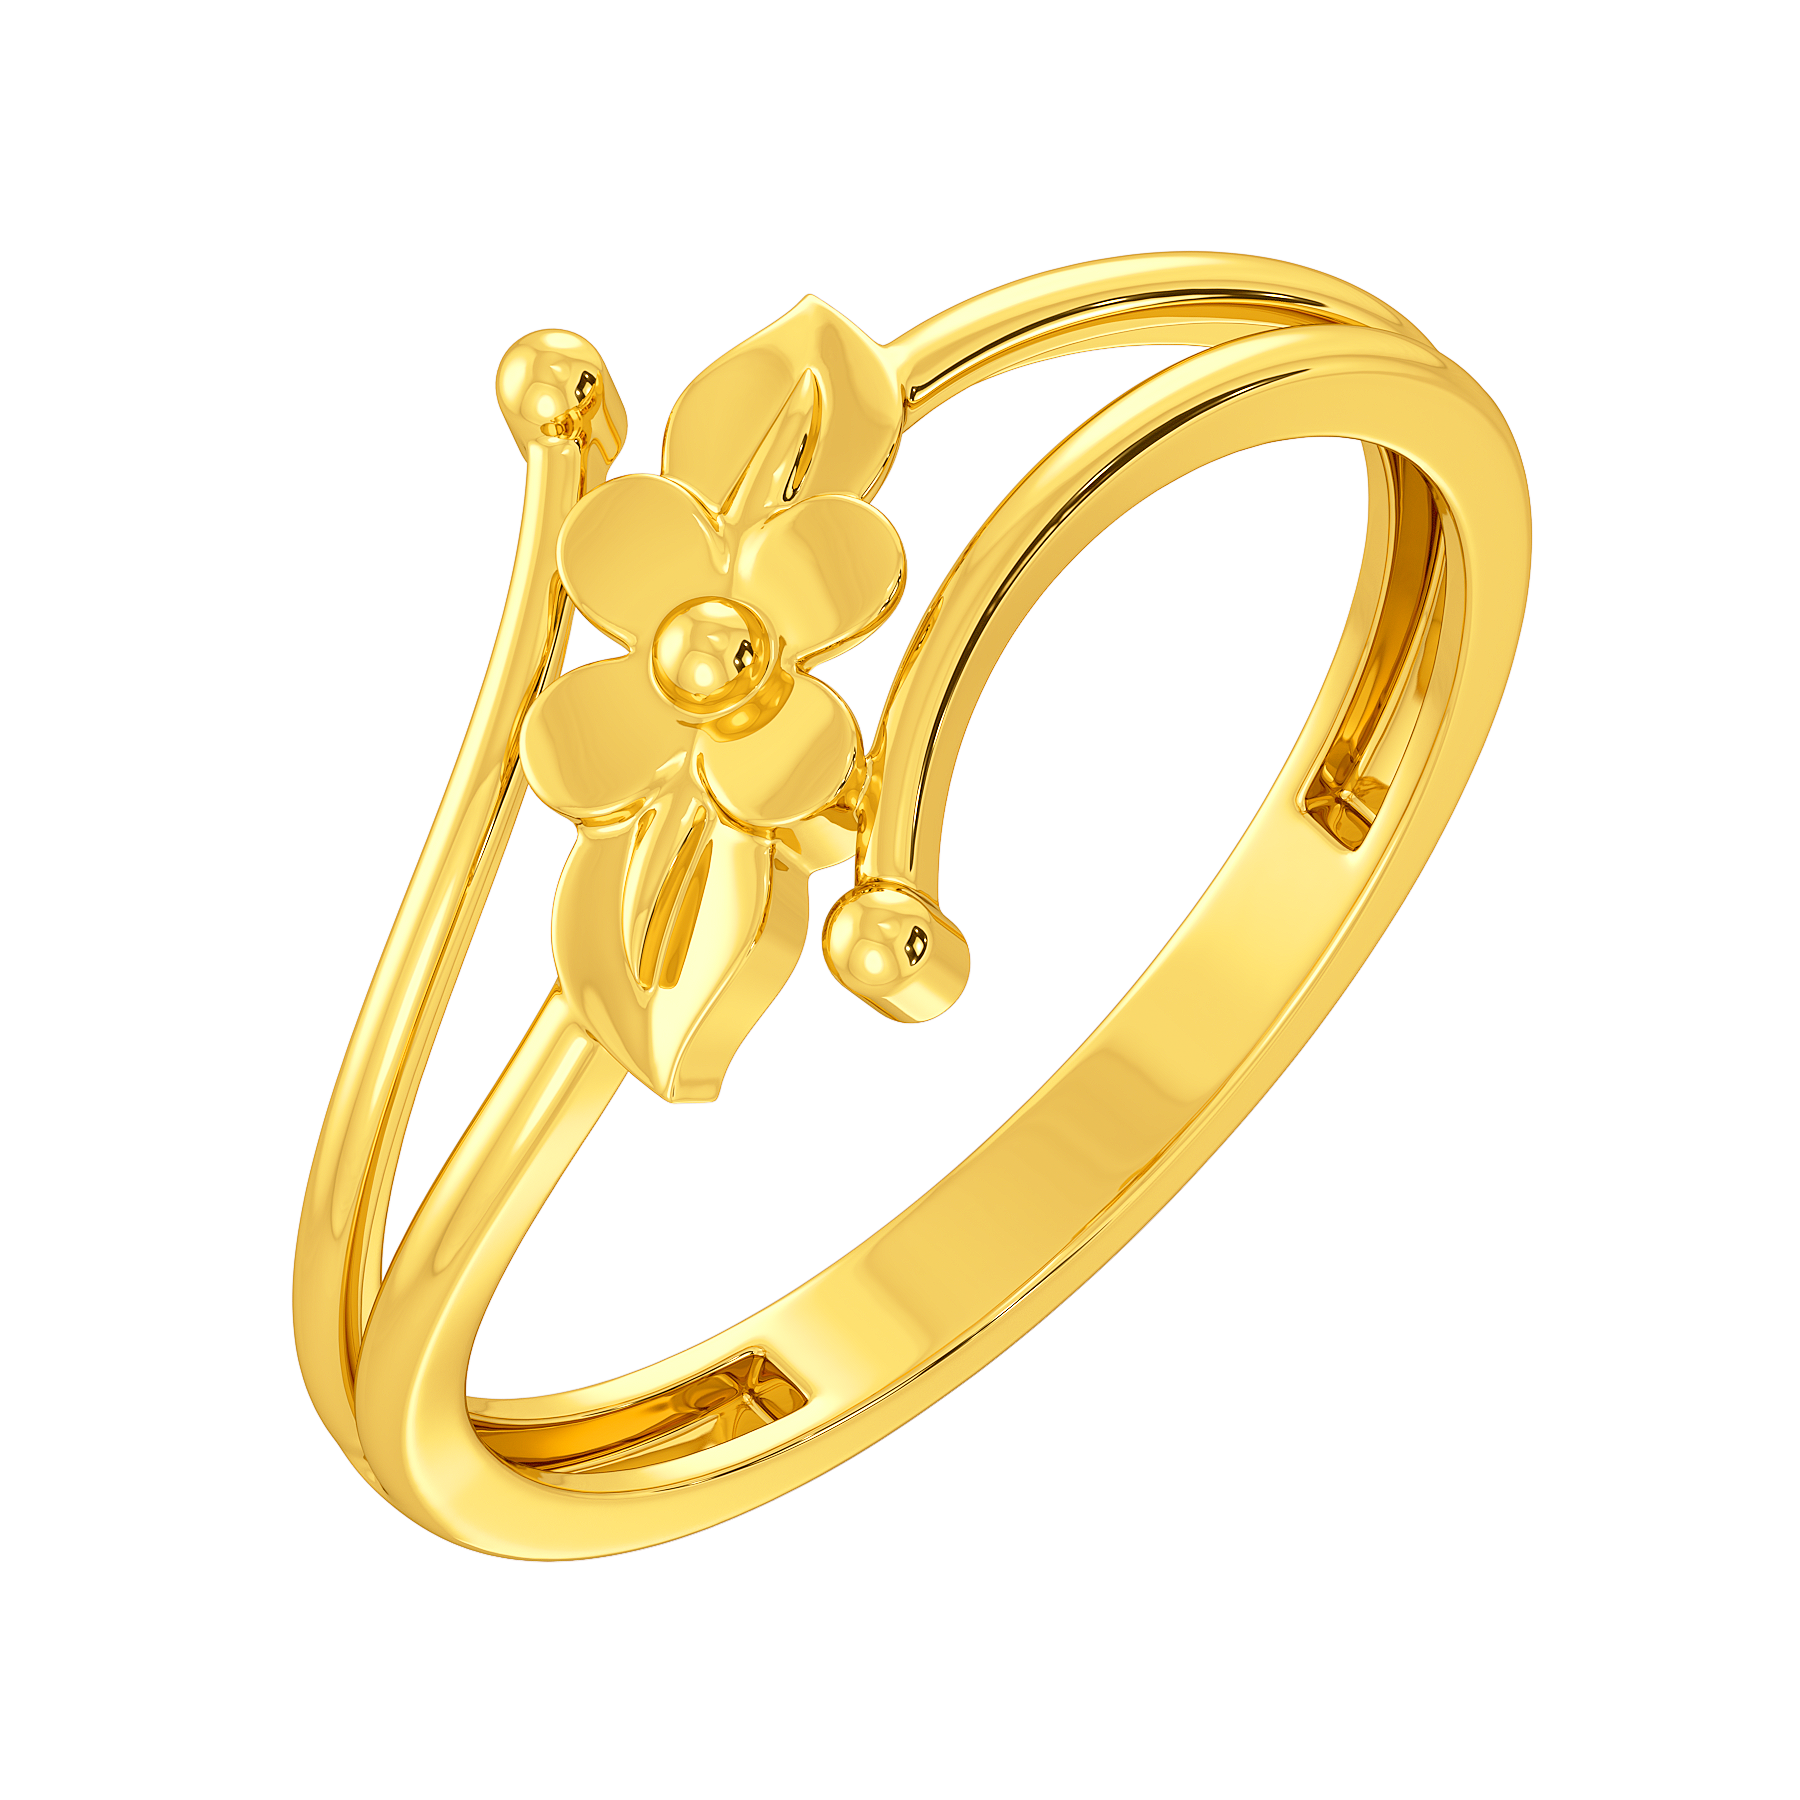 Celtic Ring - Ladies White Gold with Yellow Gold Trim Celtic Cross Wedding  Ring at IrishShop.com | WED268